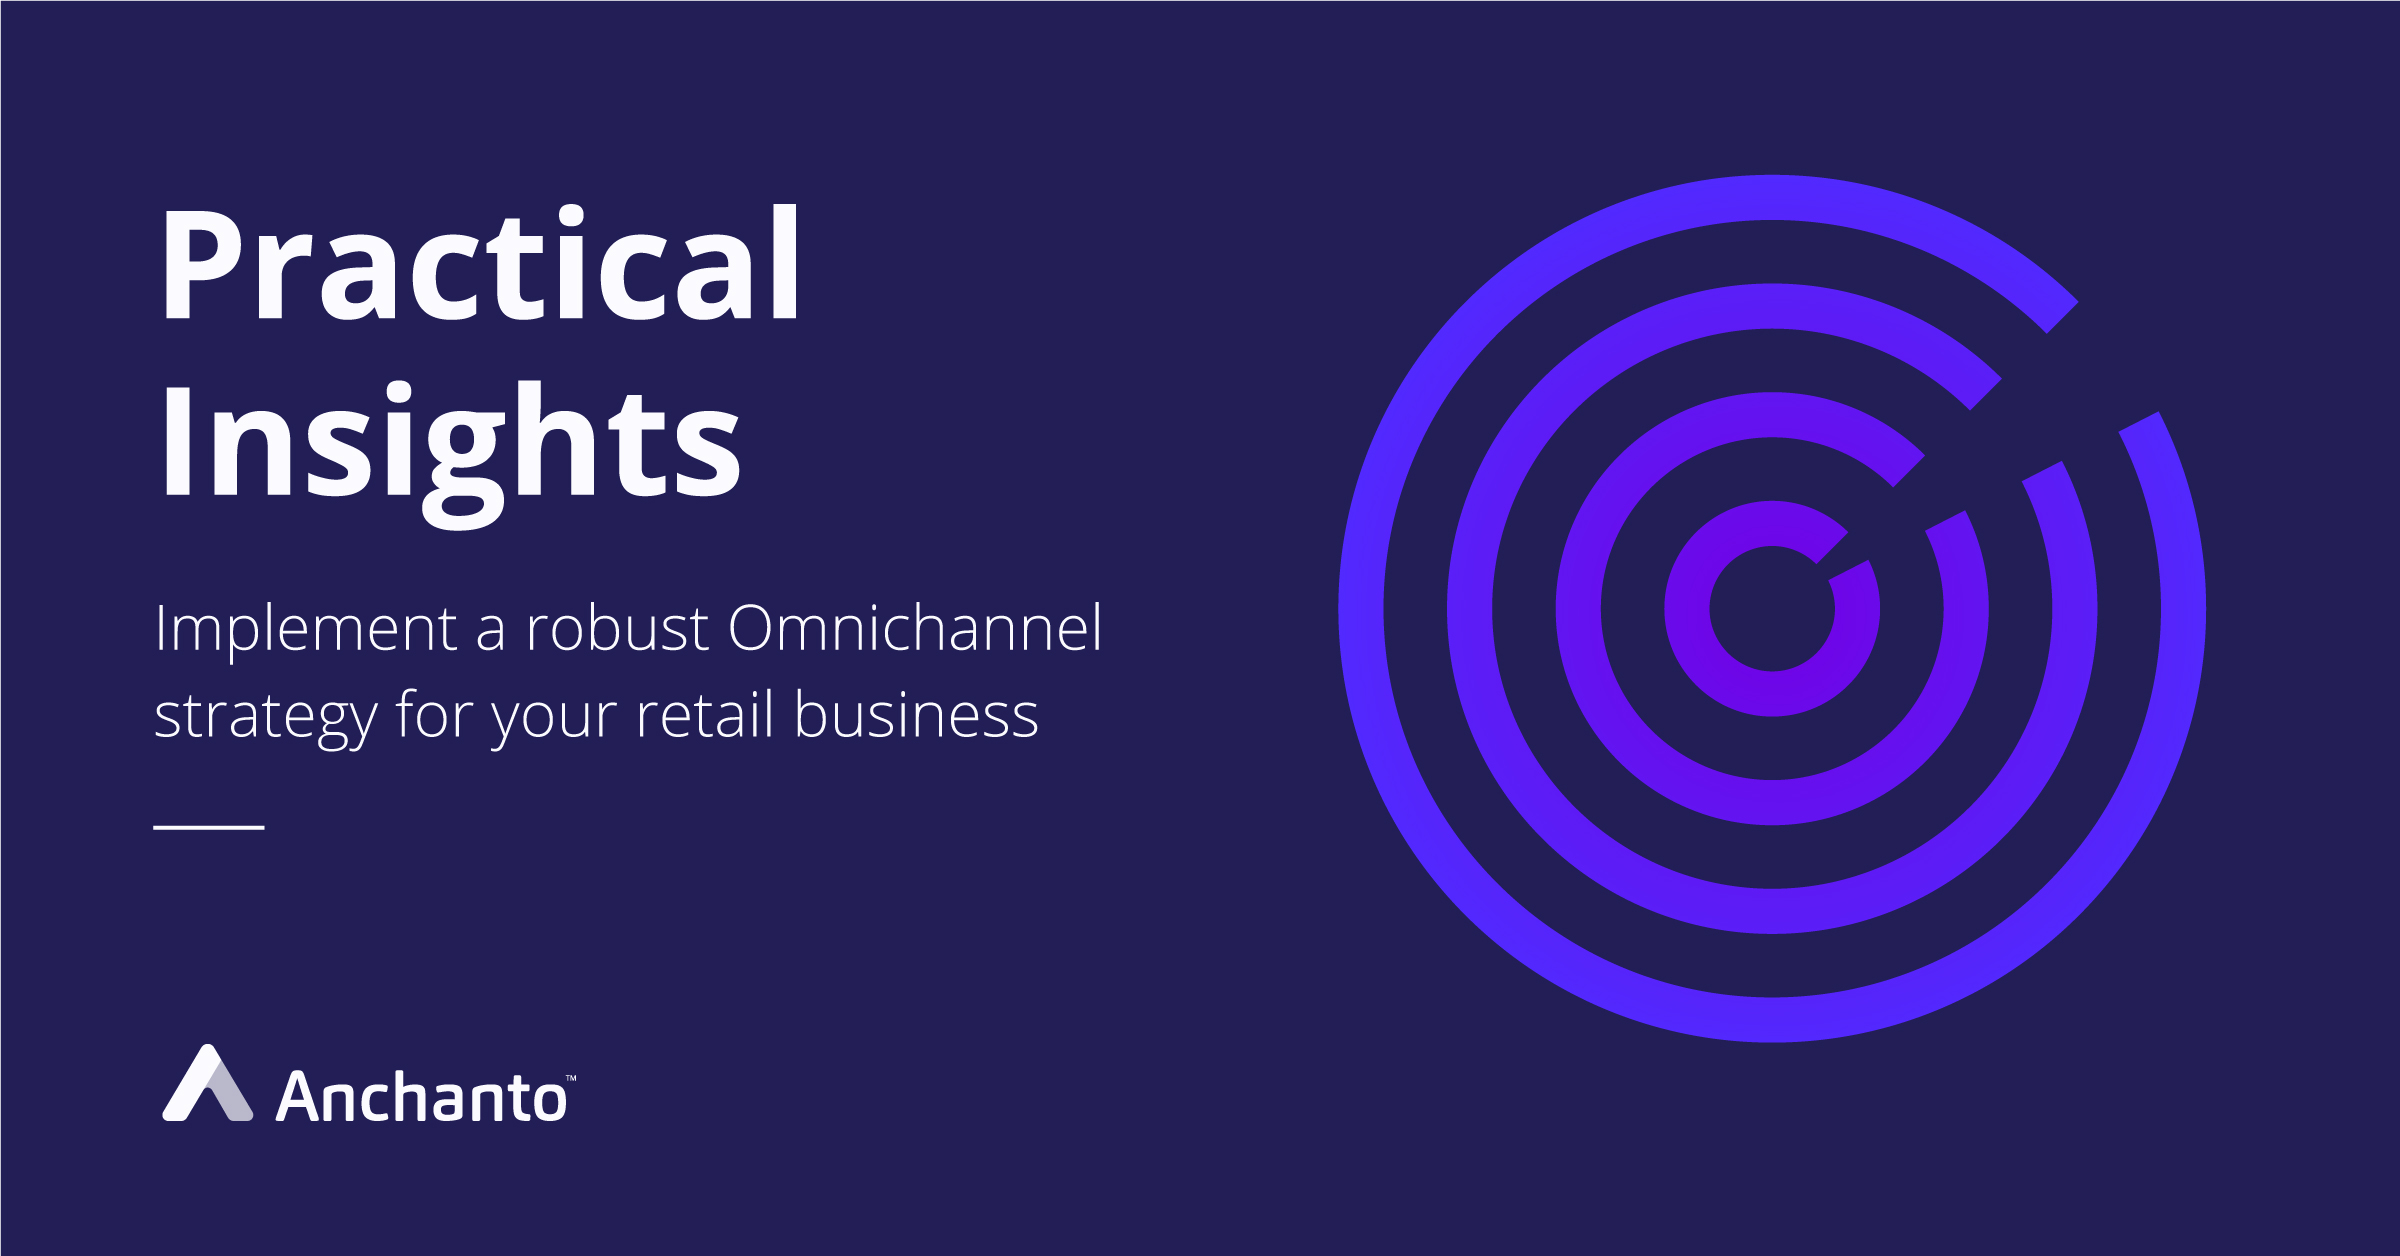 Transform your Business with Practical insights into Omnichannel Retail